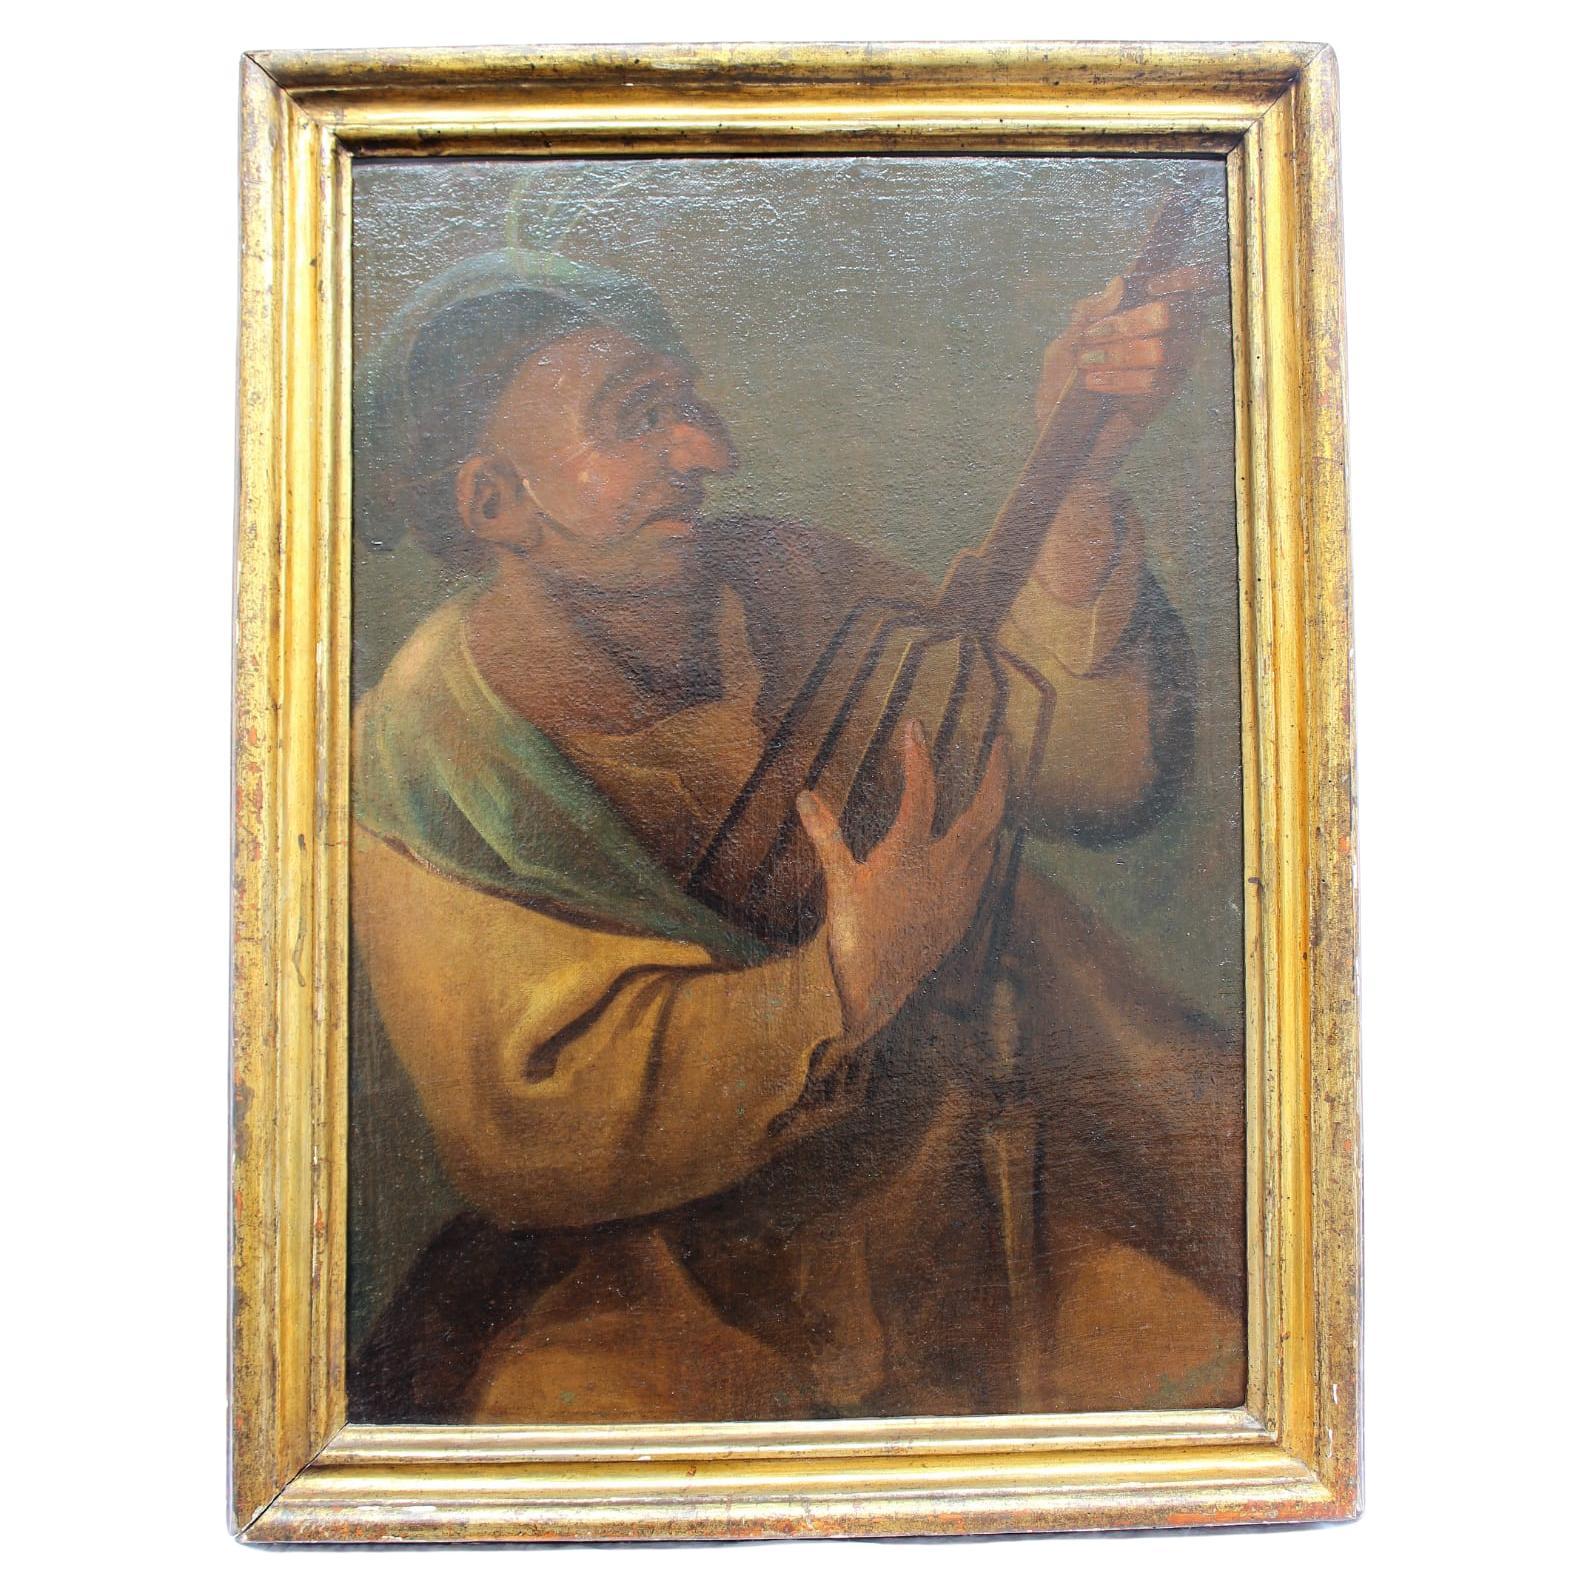 Italian School 17th Century Oil Painting The Musician For Sale